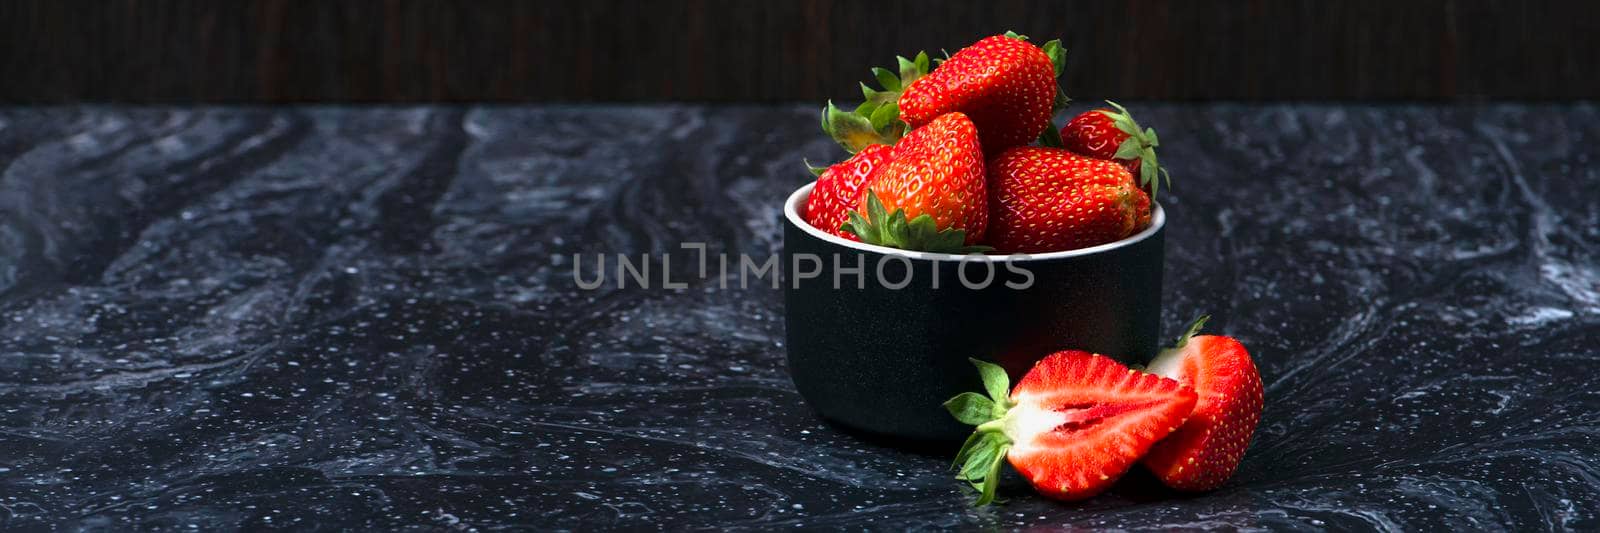 Strawberries on black marble. Ripe strawberries in a saucer on a black background. Place to insert text.